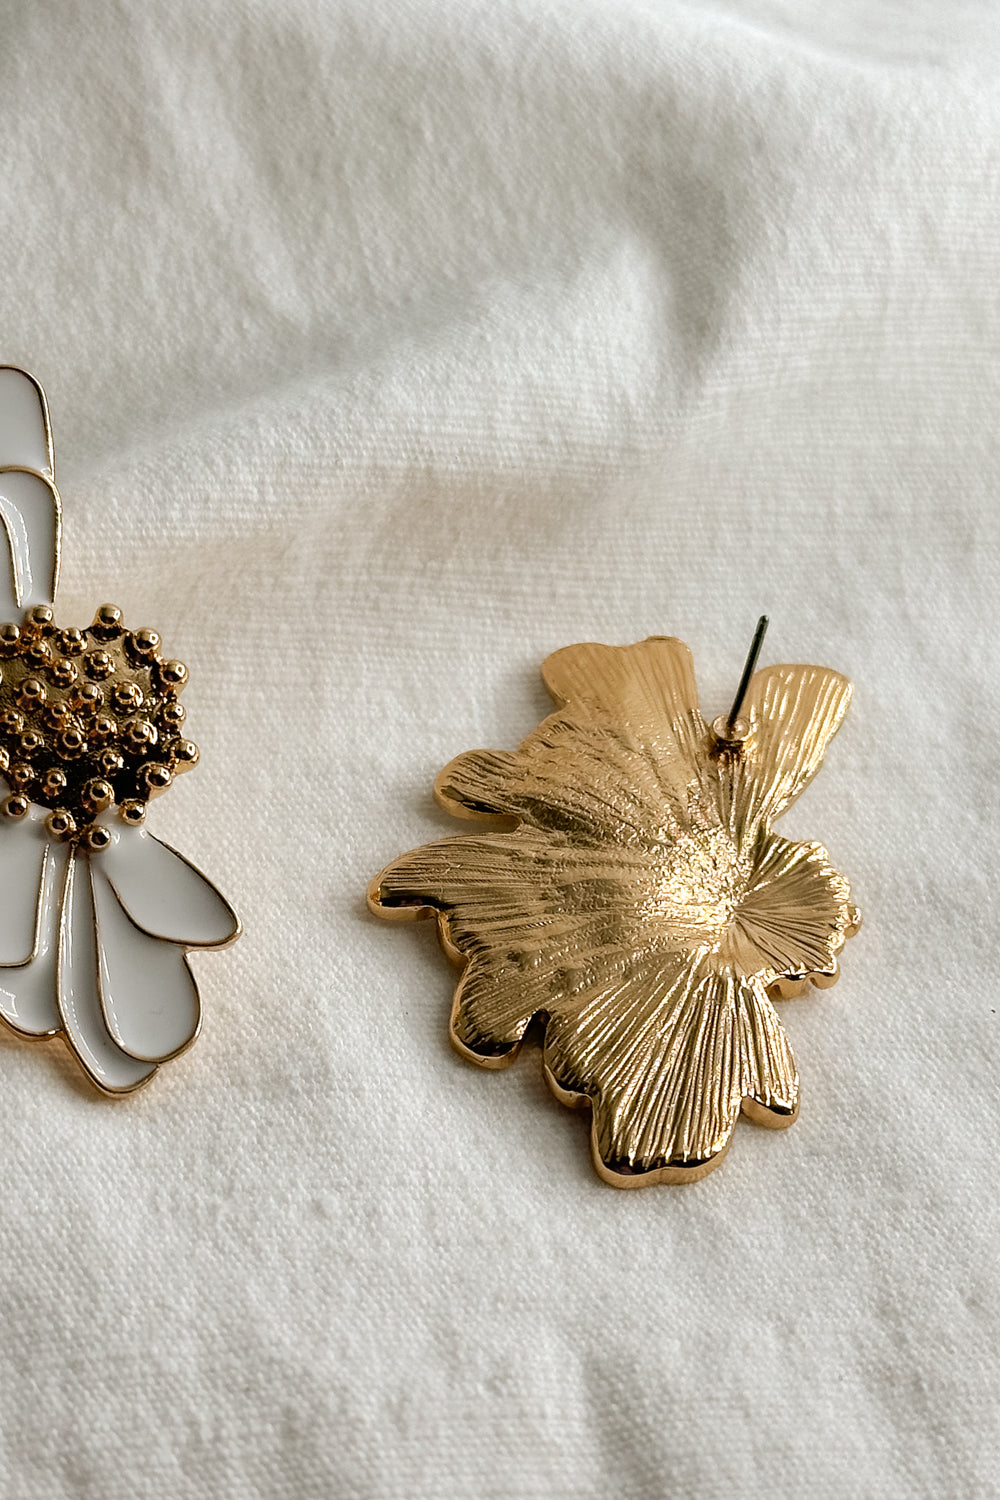 Flat lay view of the Chloe White & Gold Flower Stud Earring which features oversized white flower studs with gold details